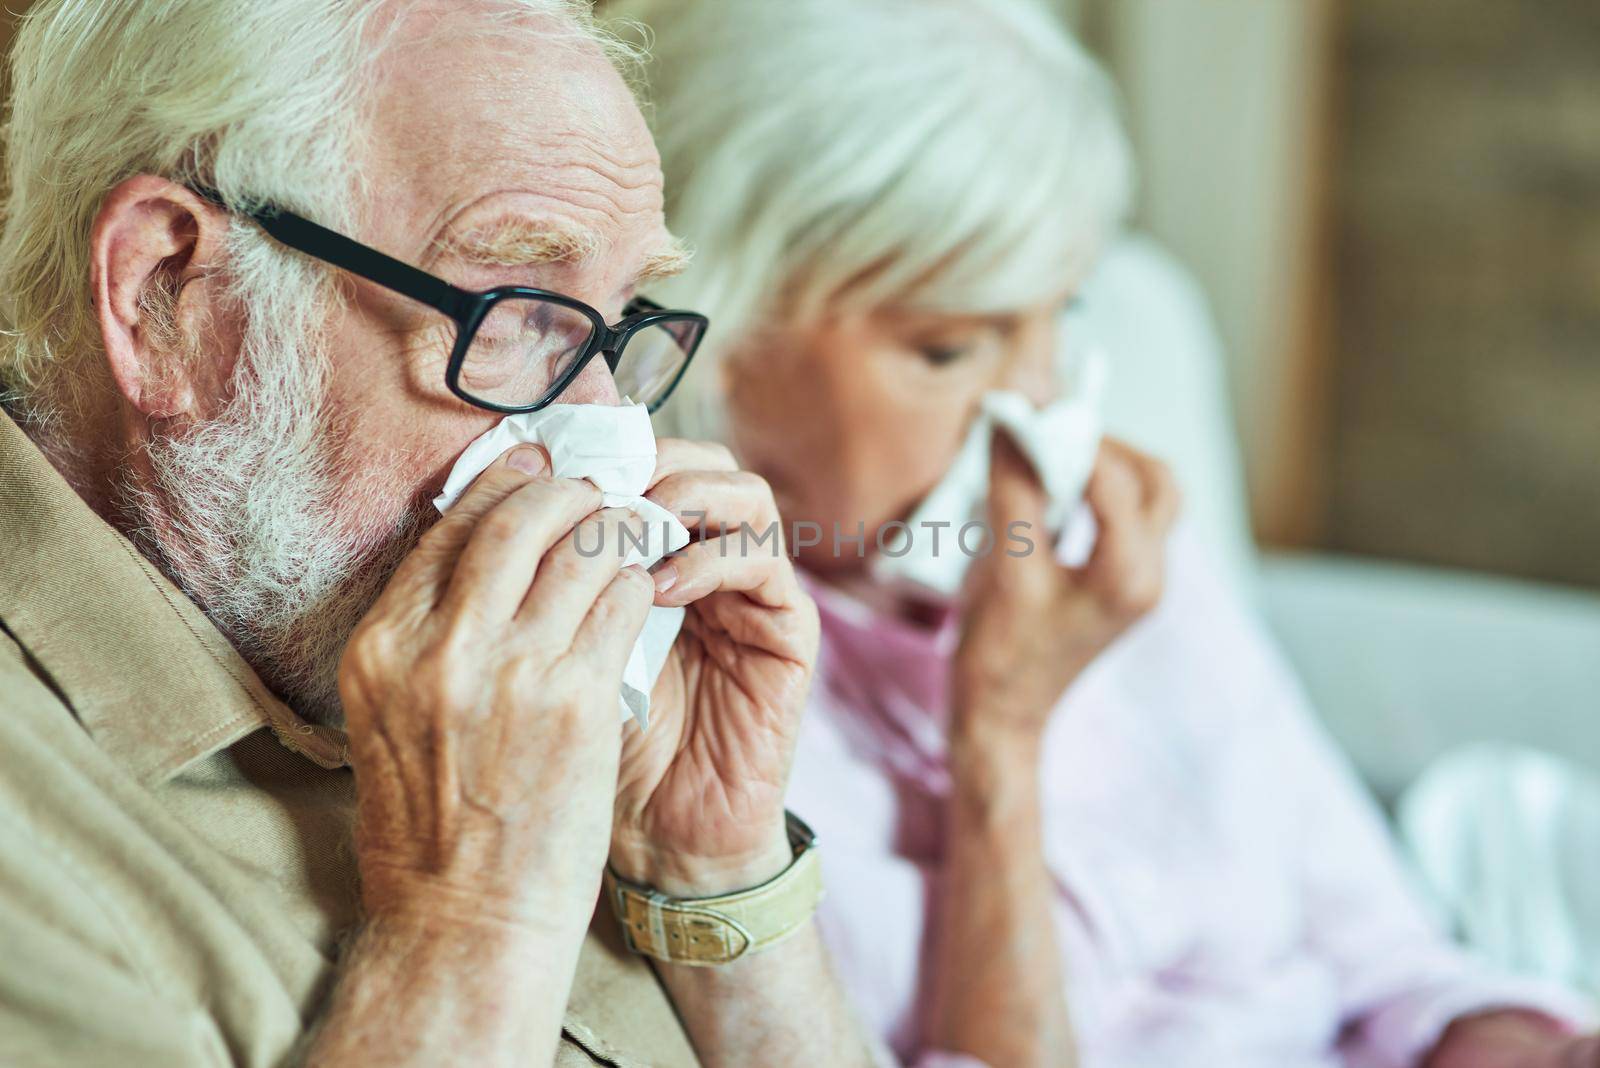 Close up of elderly man and woman with a runny nose using paper napkins. Care and health concept